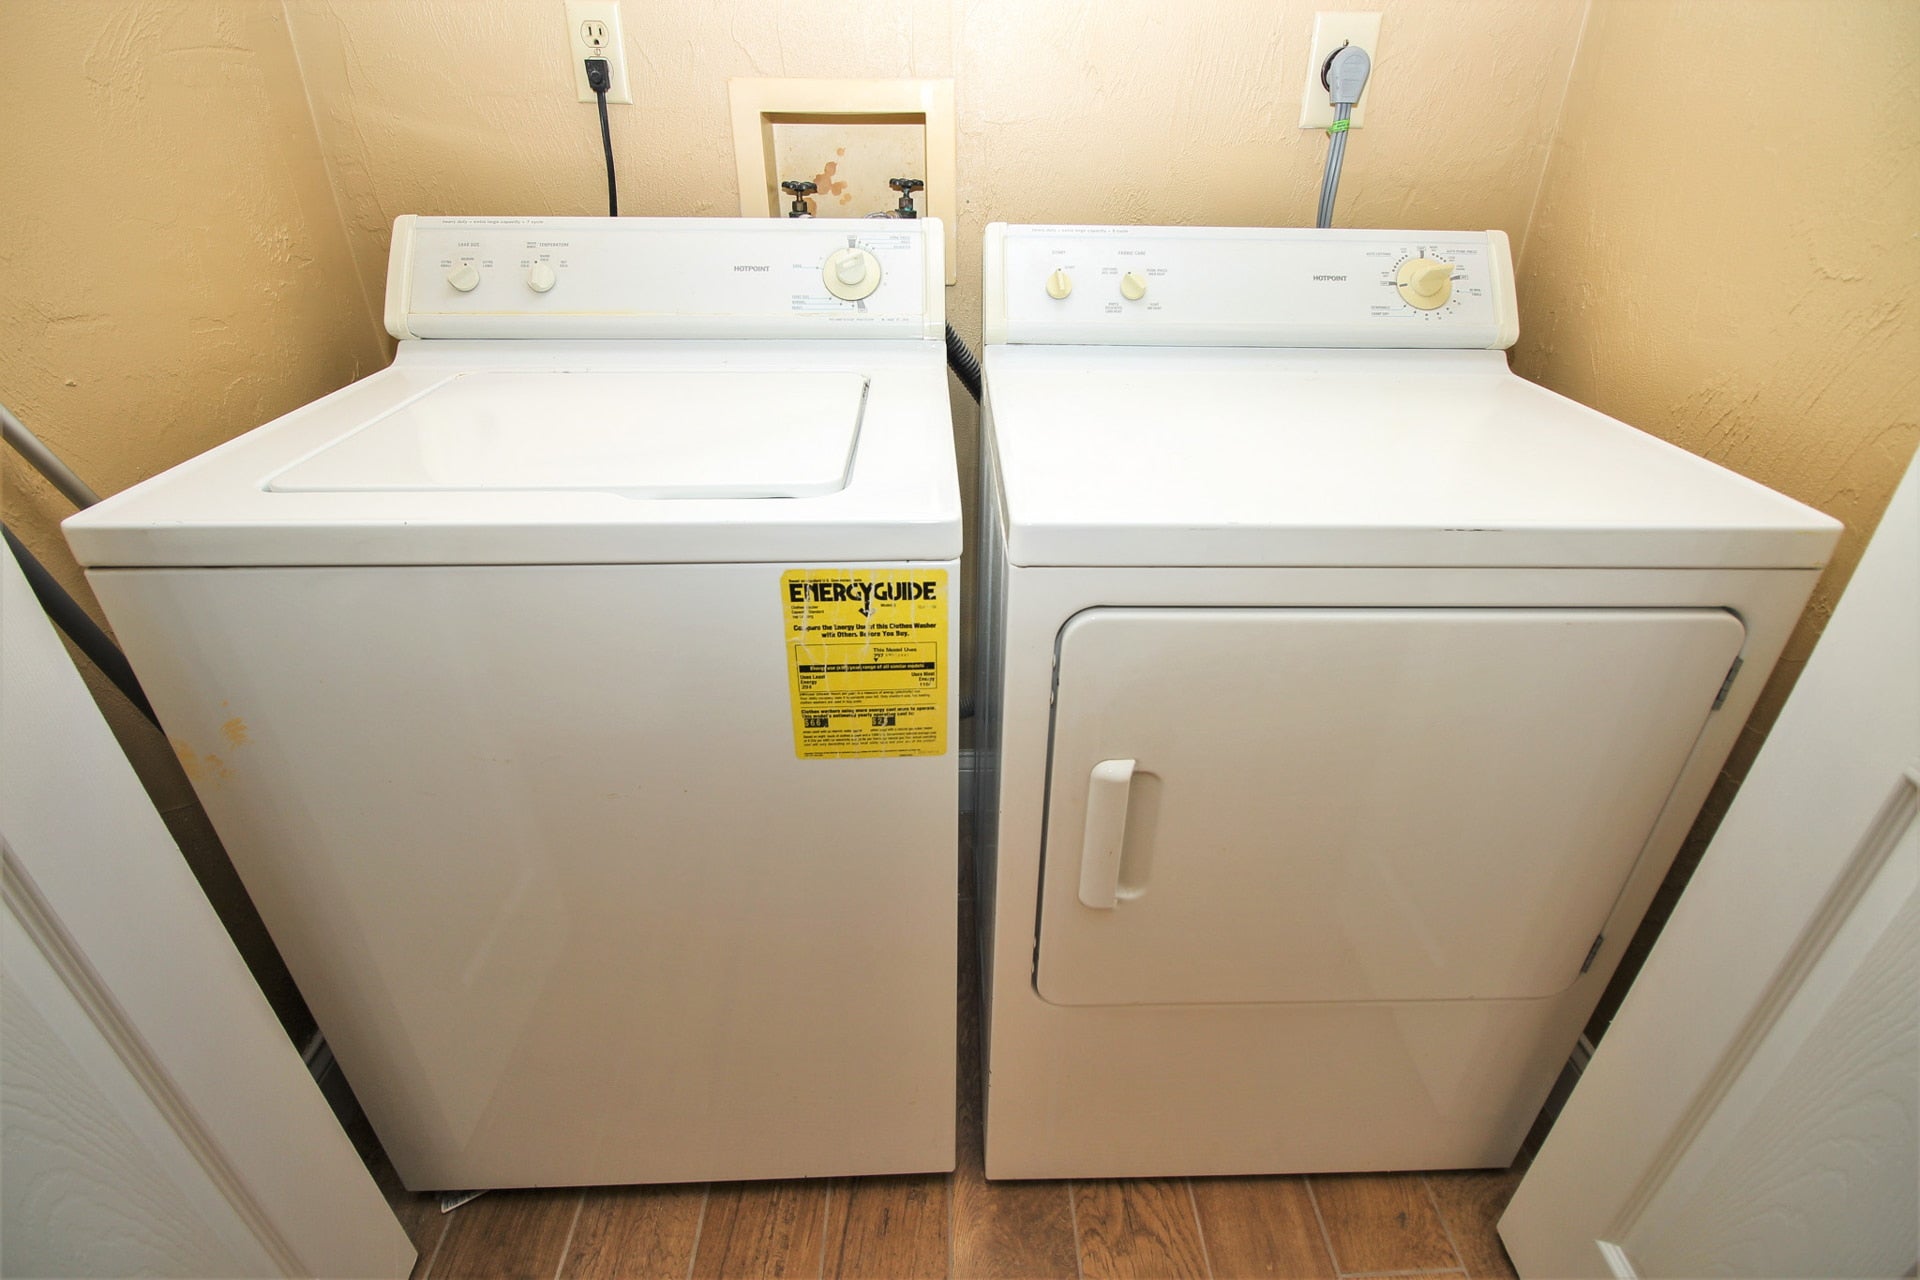 Full washer and dryer